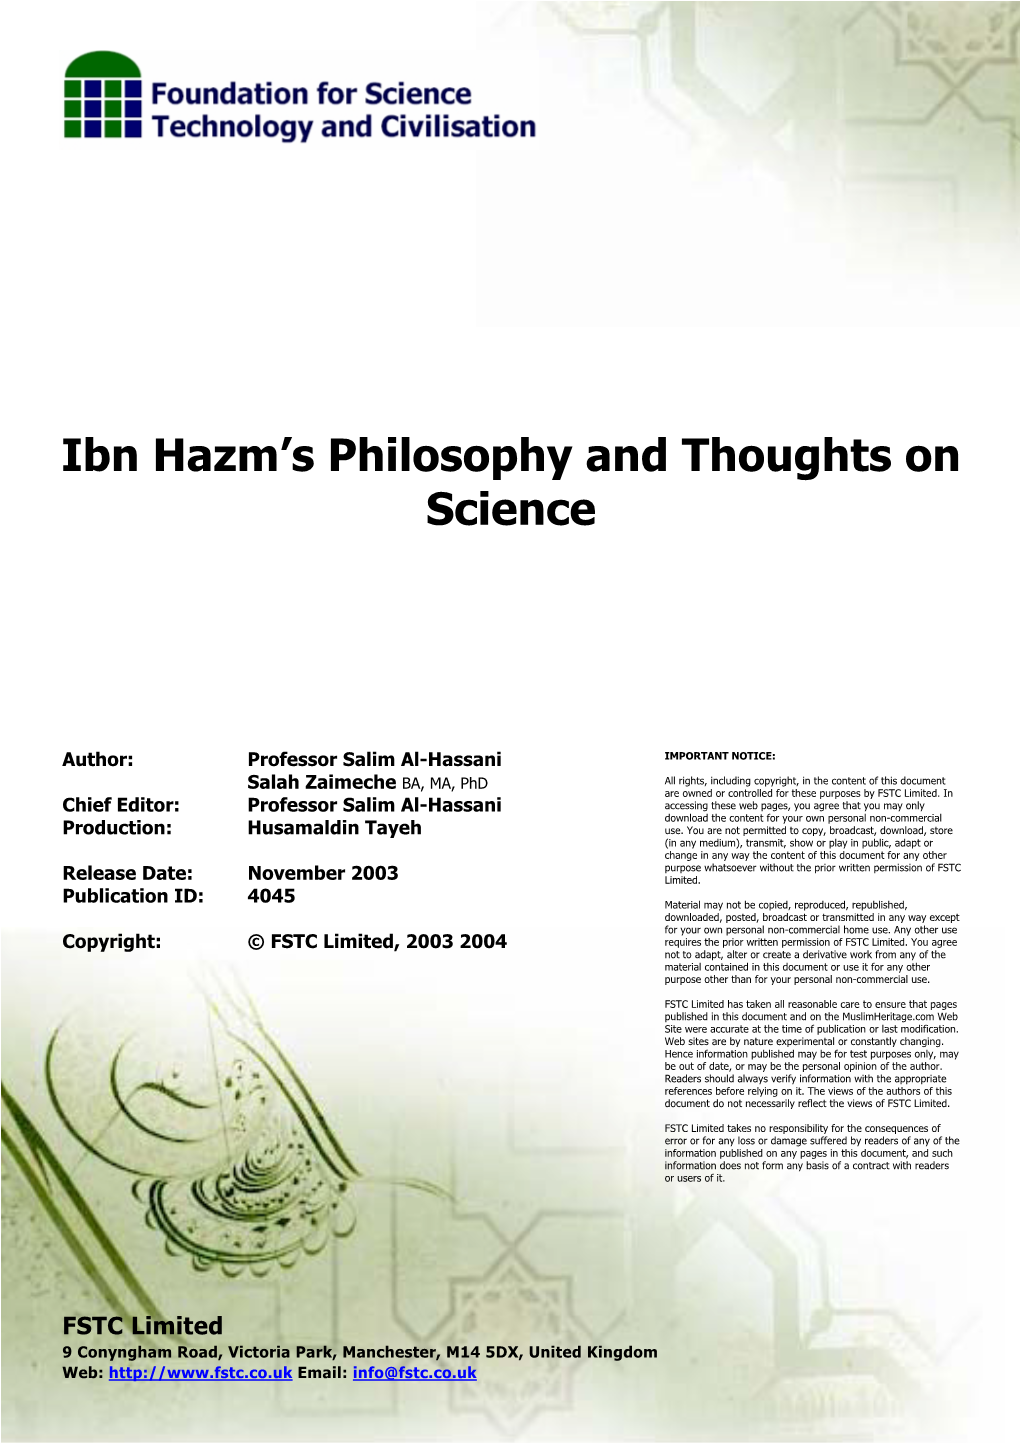 Ibn Hazm's Philosophy and Thoughts on Science